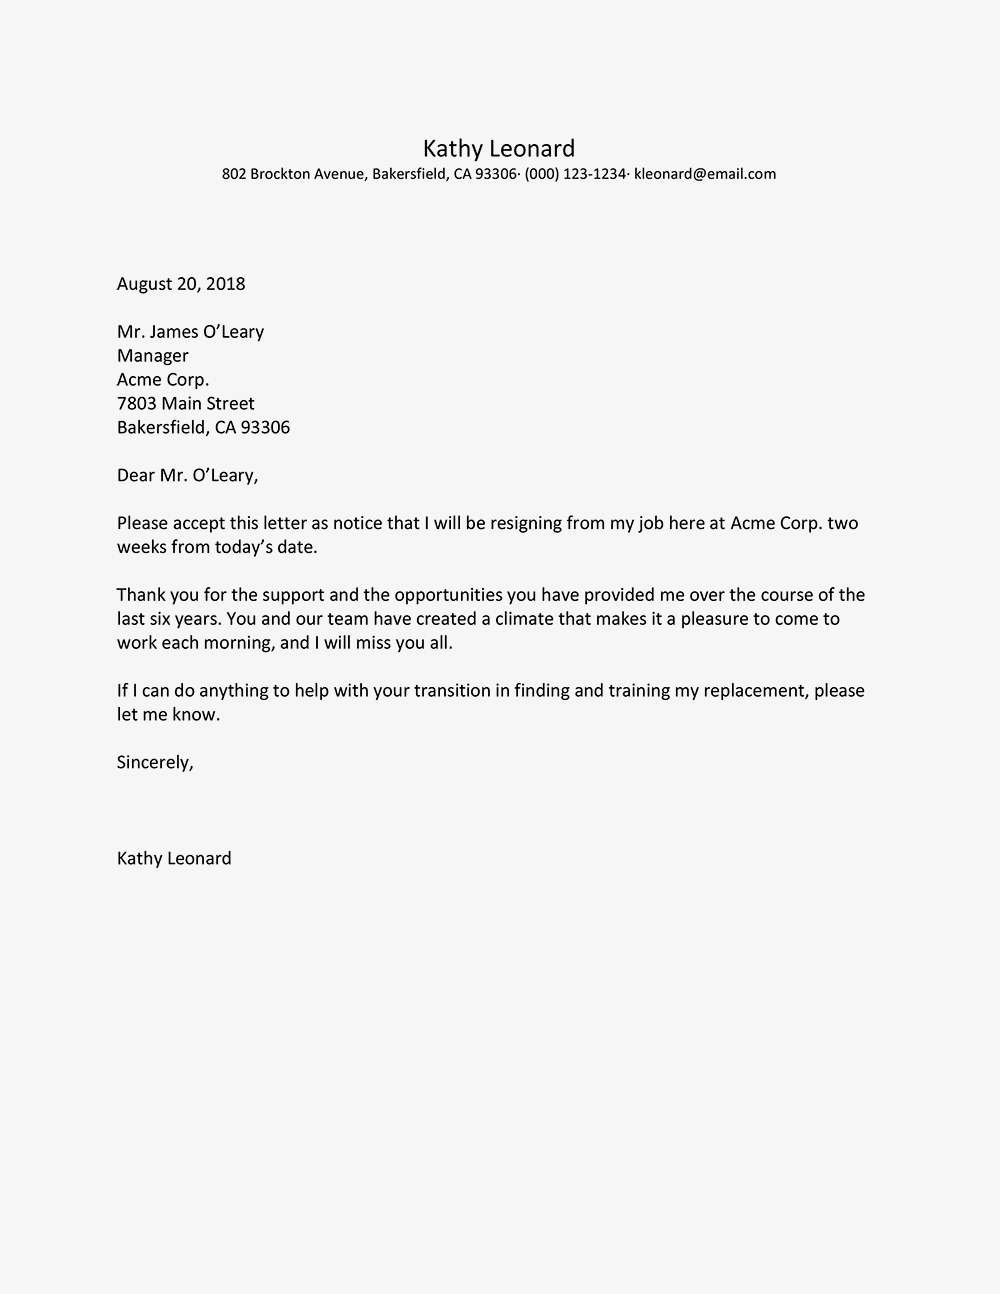 Letter Of Resignation Template  Writing A Letter Of Resignation Samples Cablomongroundsapexco